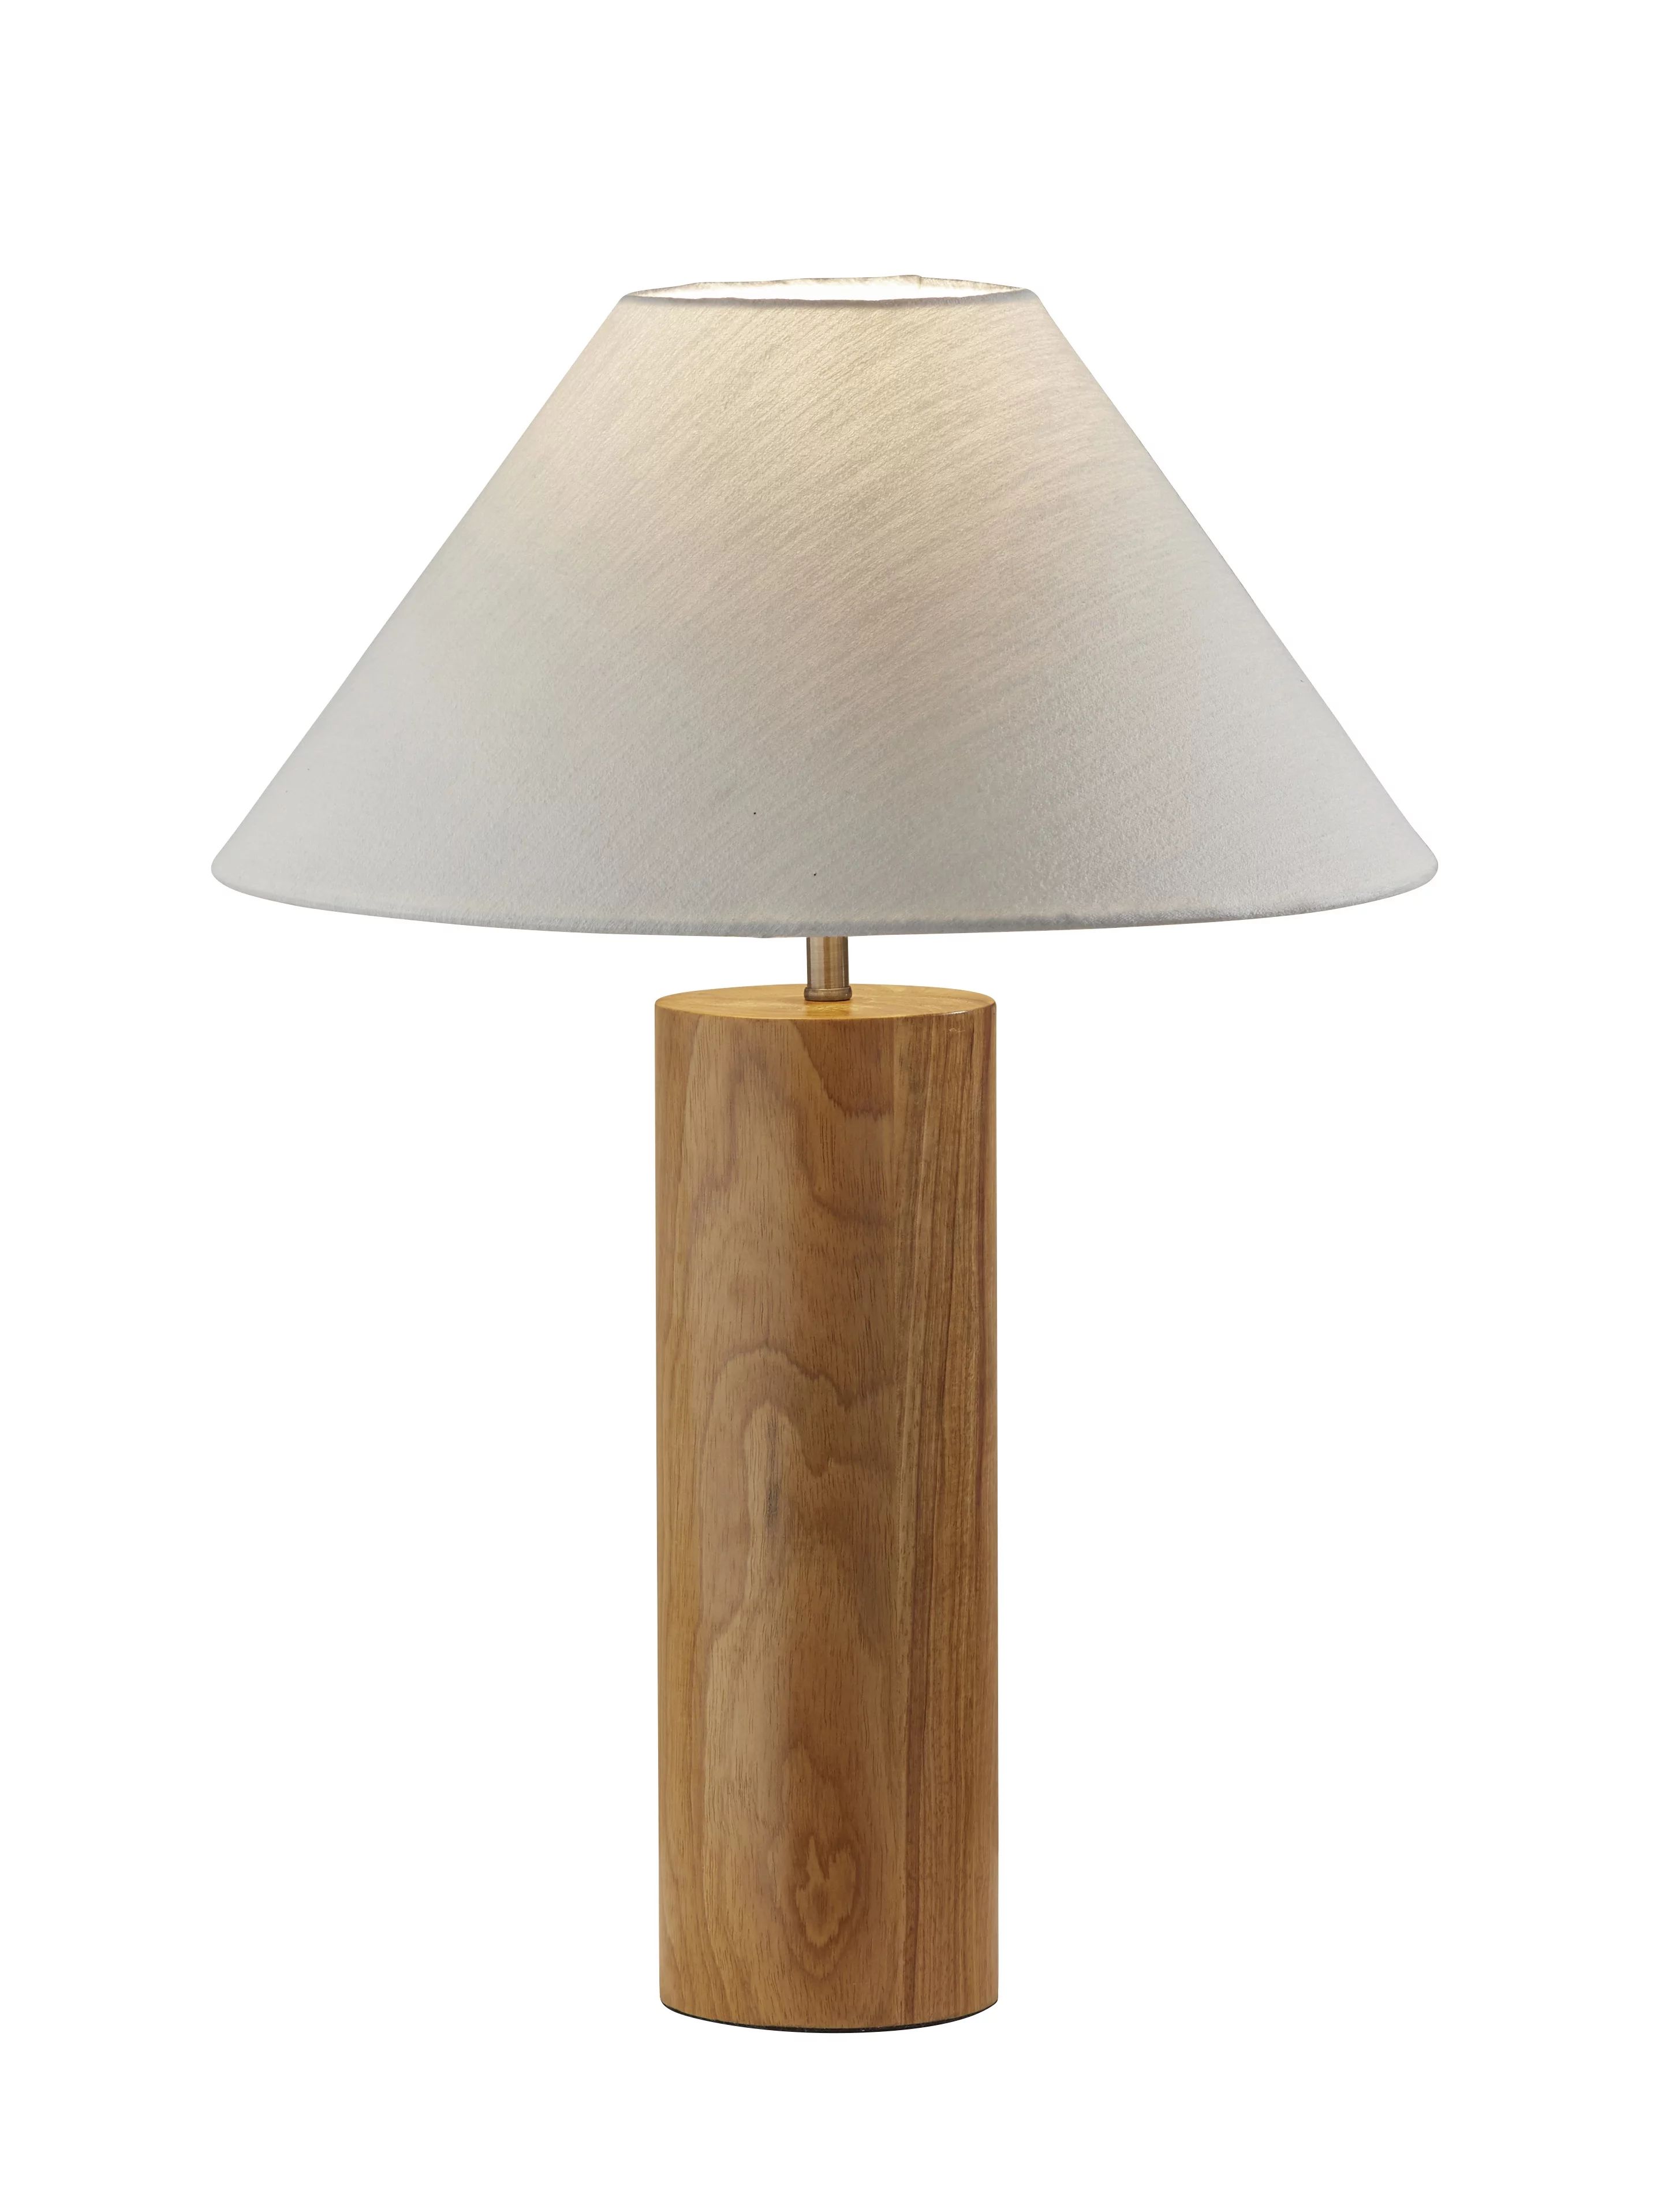 Adesso Martin Table Lamp, Natural Oak Wood with Antique Brass Accent - Walmart.com | Walmart (US)